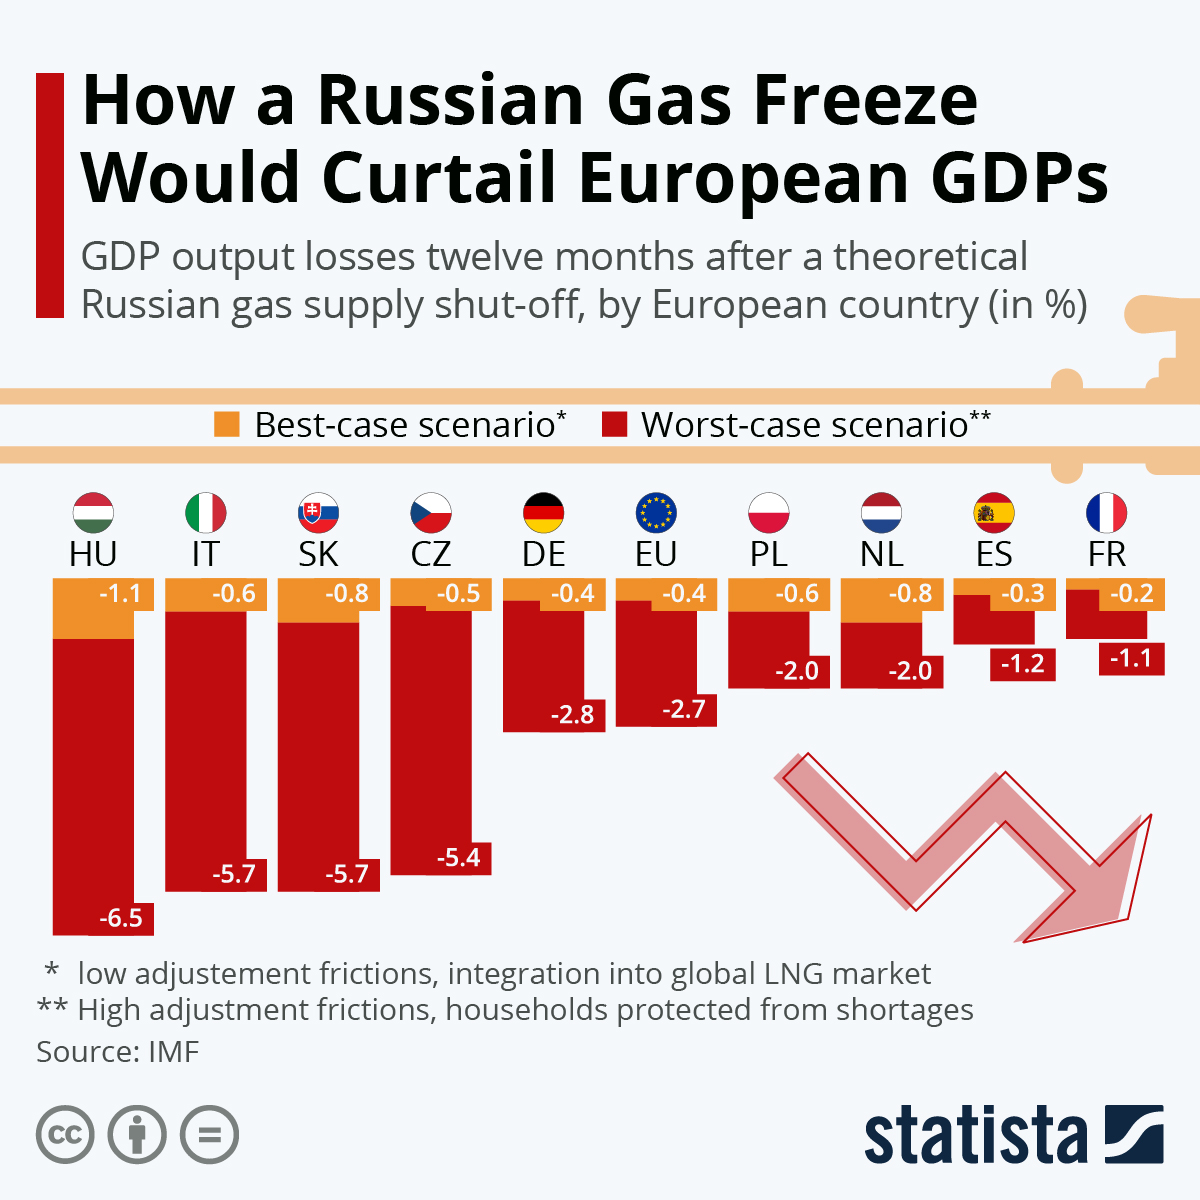 GDP output losses twelve months after a theoretical Russian gas supply shut off, by European country